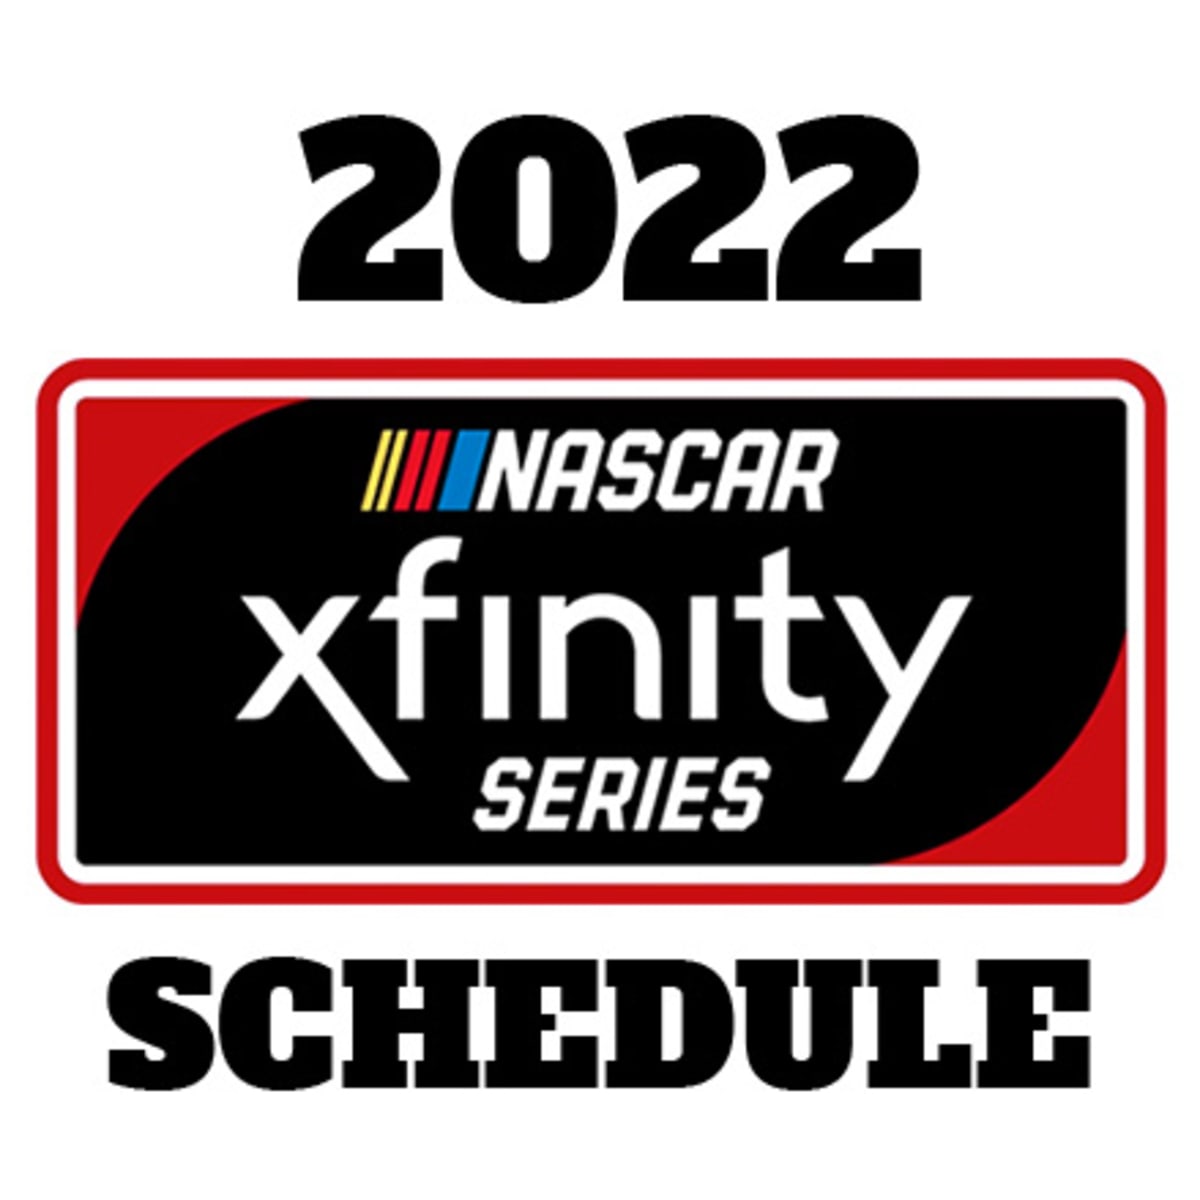 Nascar Printable Schedule 2022 2022 Nascar Xfinity Series Schedule - Athlonsports.com | Expert  Predictions, Picks, And Previews